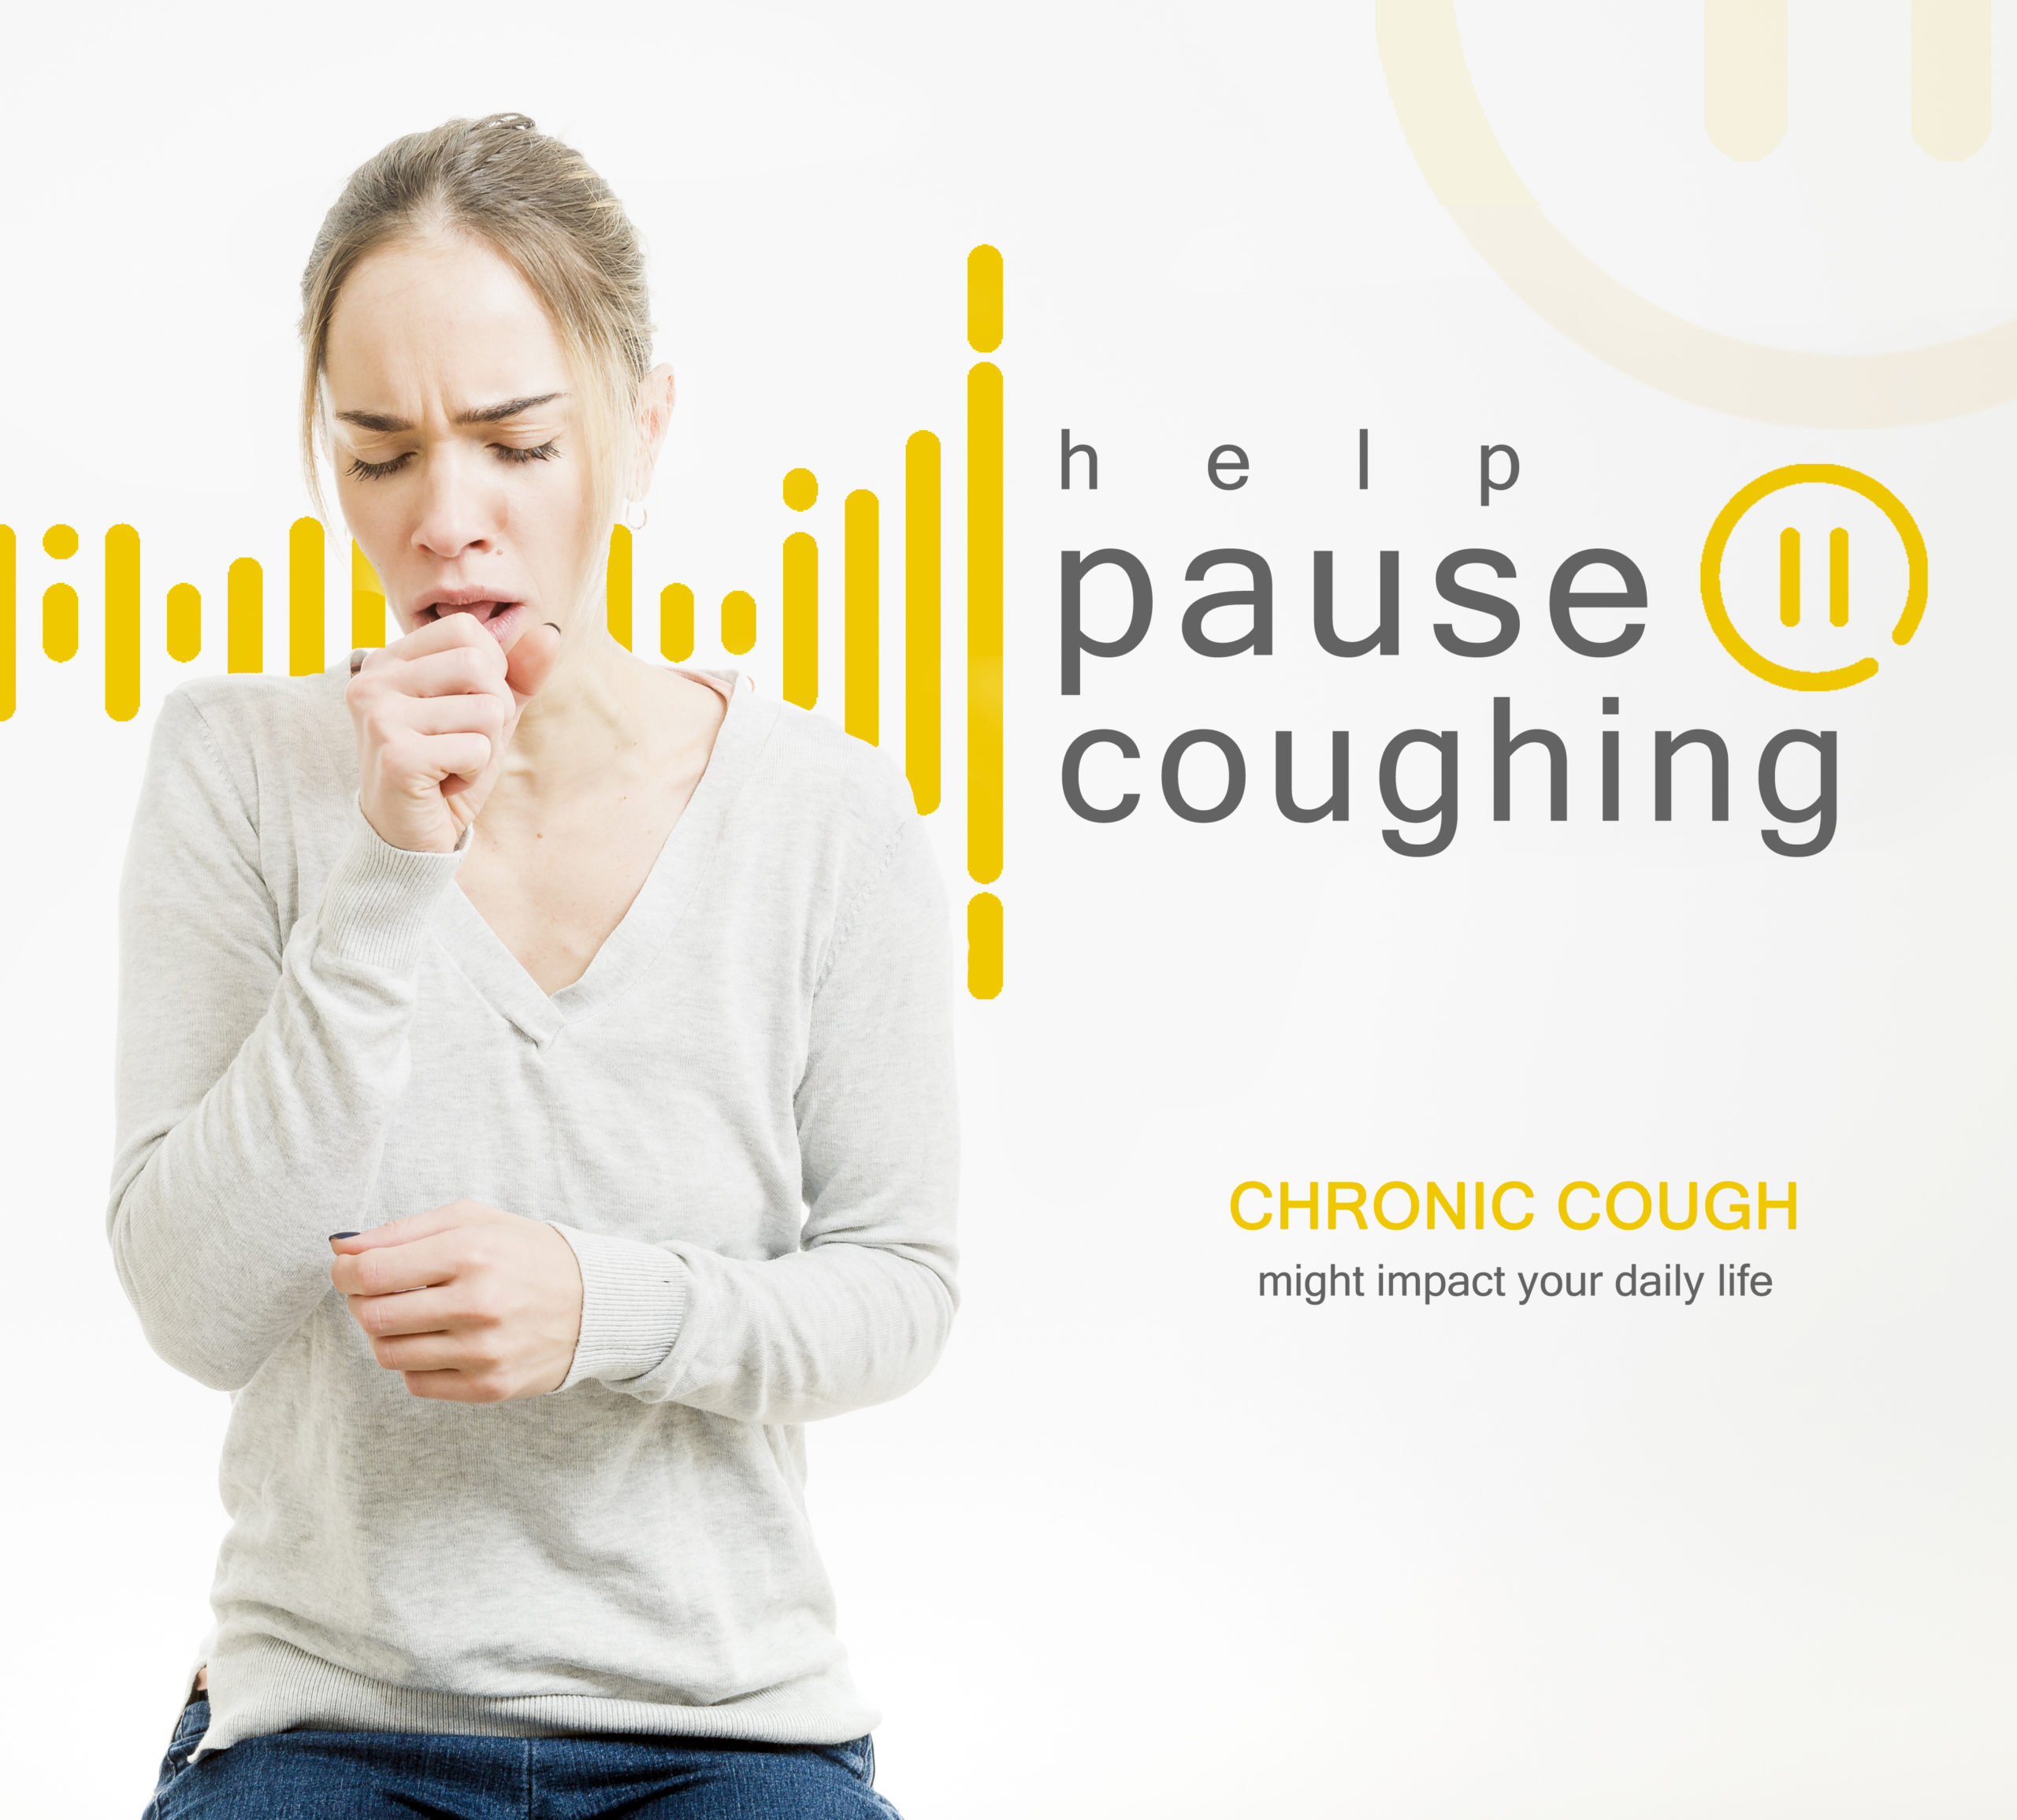 Help pause Coughing